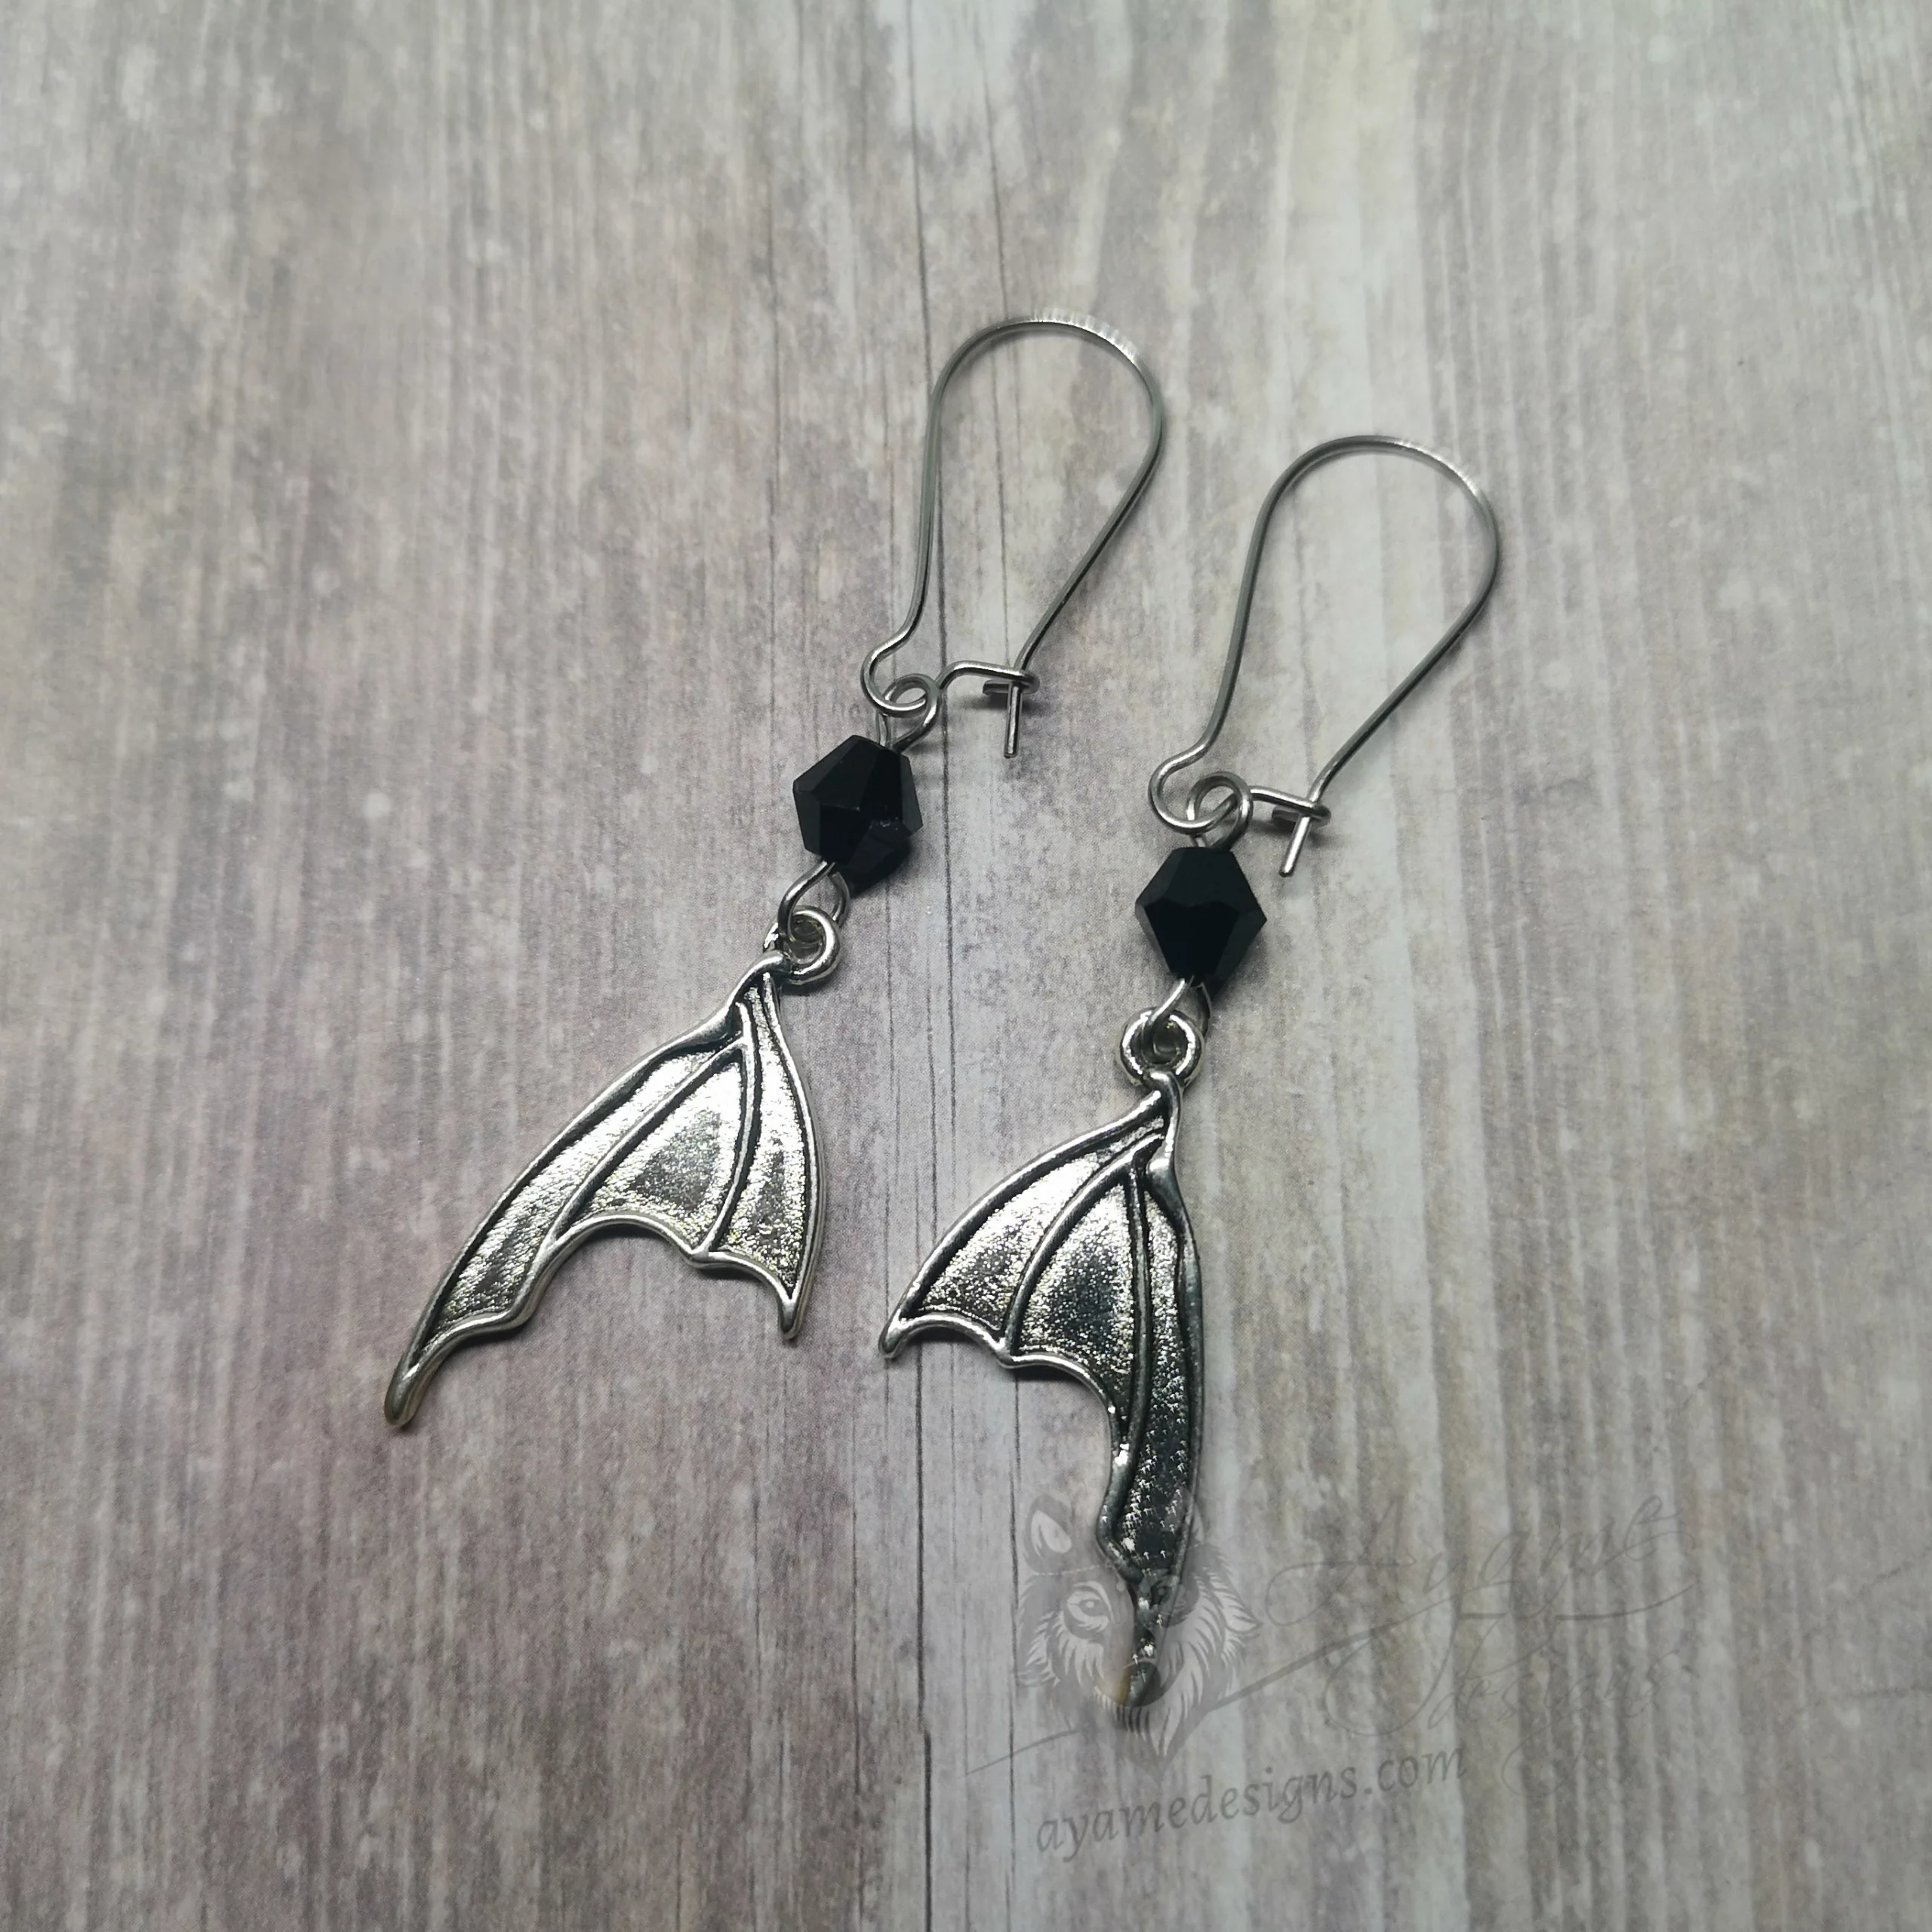 Handmade gothic earrings with small bat wings and black Austrian crystal beads on stainless steel kidney earring hooks